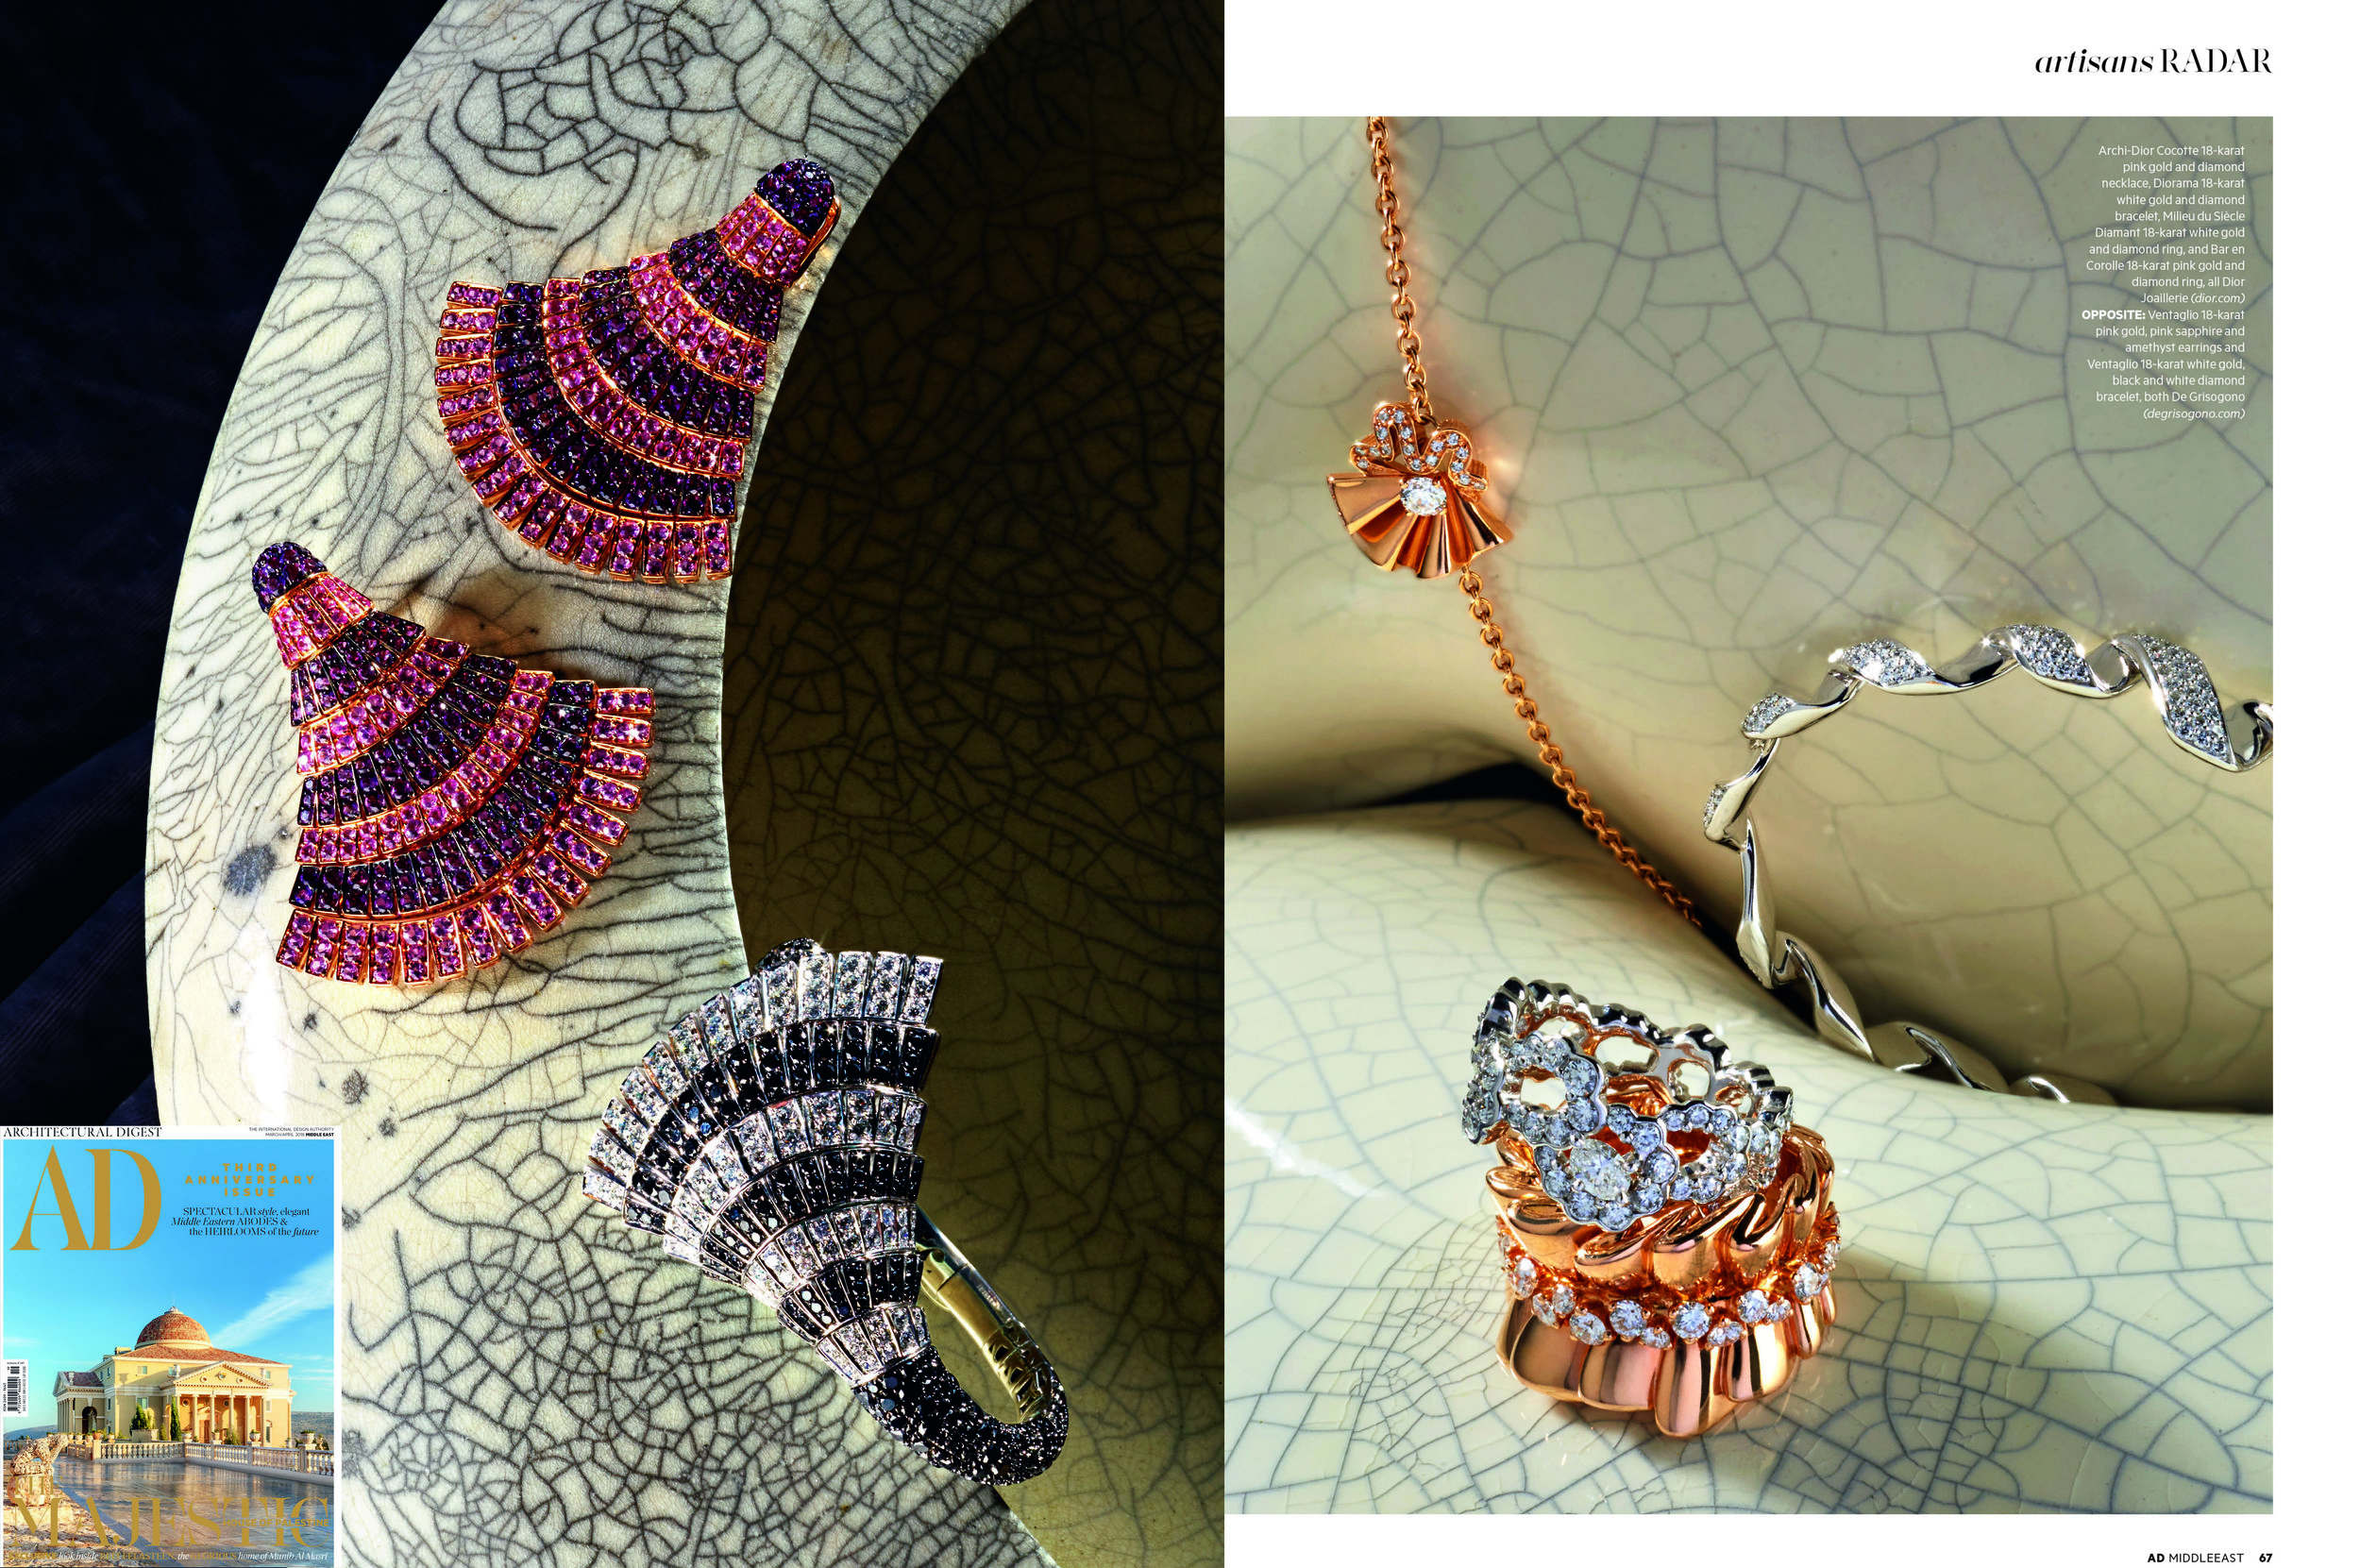  As featured in AD Middle East 3rd anniversary edition with high jewelery from Dior Joaillerie  (dior.com)  and De Grisogono  (degrisogono.com)  